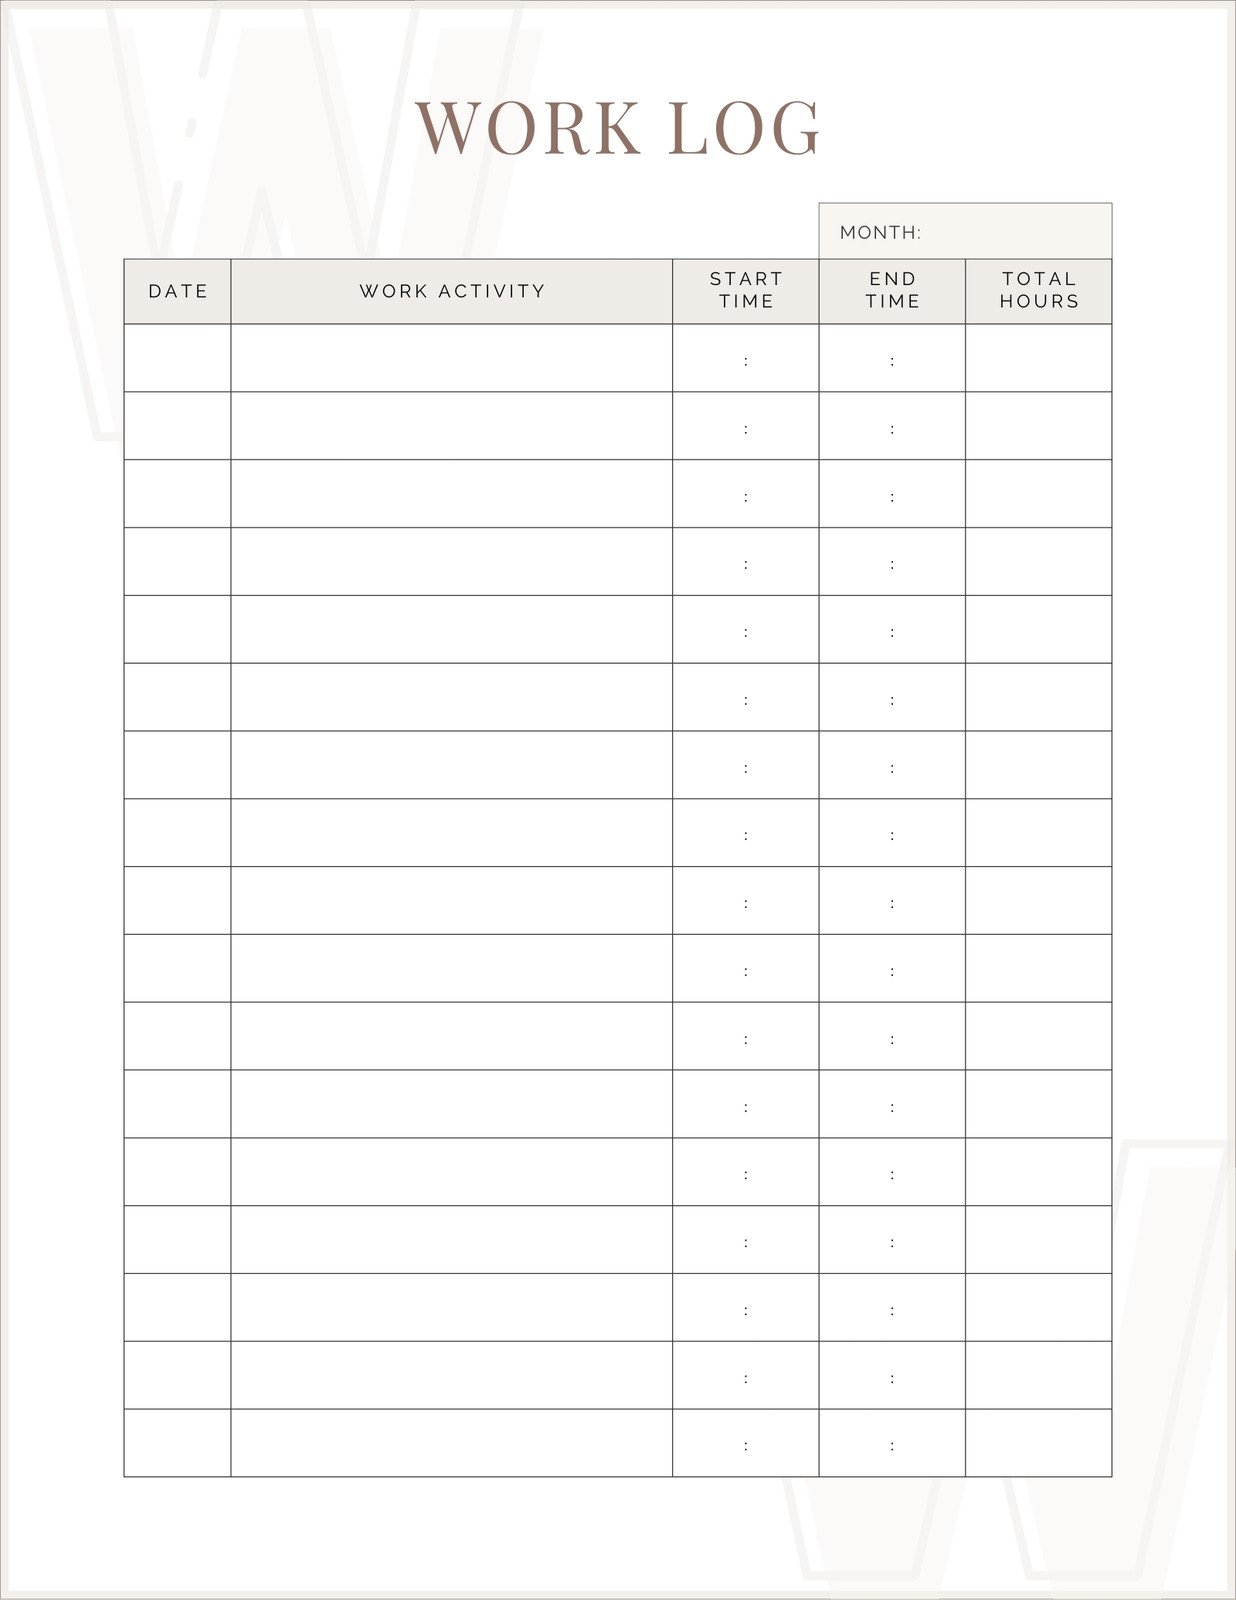 Coloring Book Log Book & Organizer Instant Download-Keep Track of